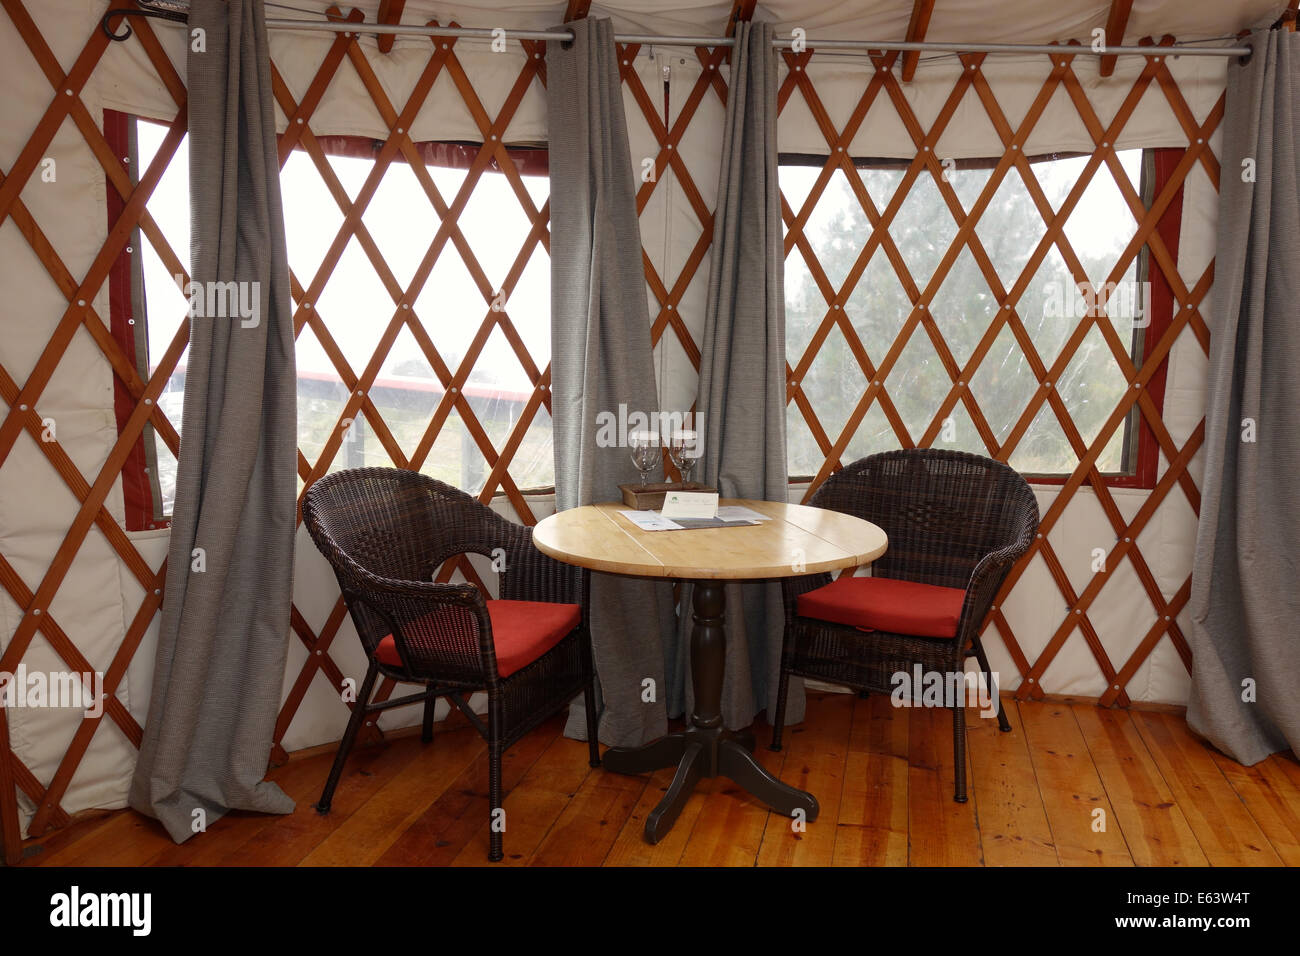 Treebones Resort is a 'glamping' campground in Big Sur, California. View of inside the luxury yurt dining area. Stock Photo